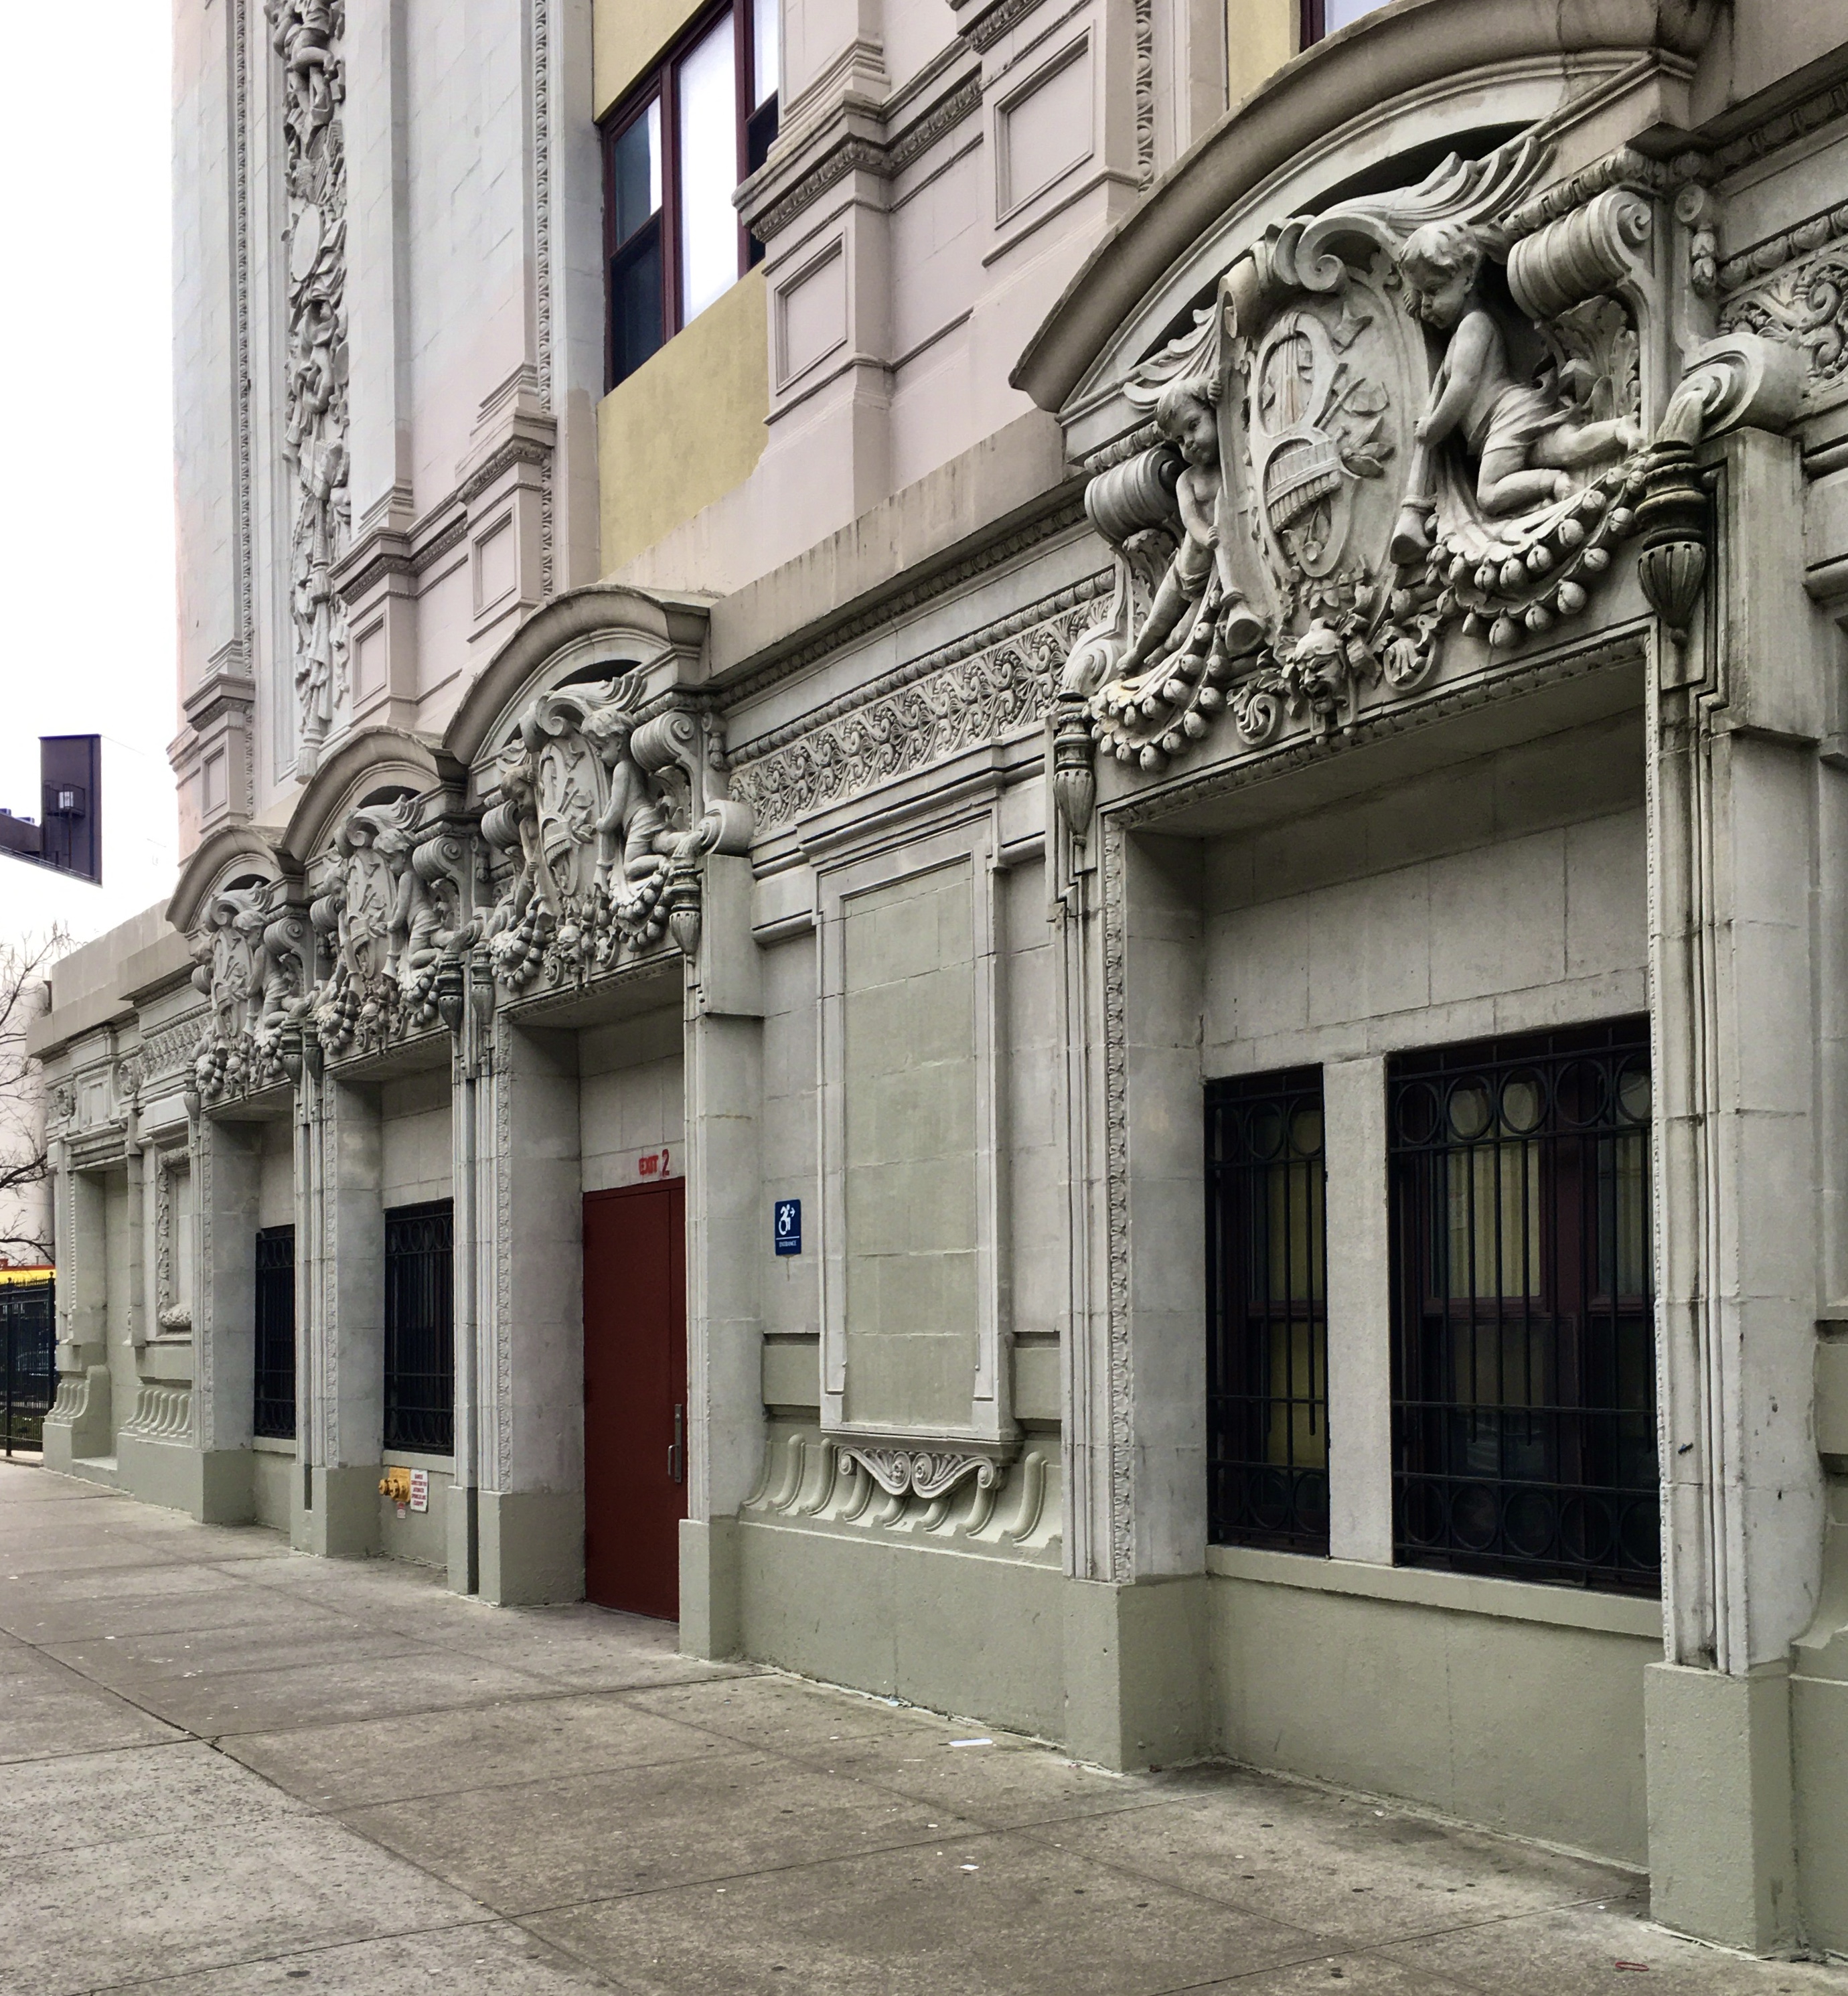 Cherubs line up on the facade of the former Bushwick Theatre, which is now the Brooklyn High School for Law and Technology. Photo: Lore Croghan/Brooklyn Eagle